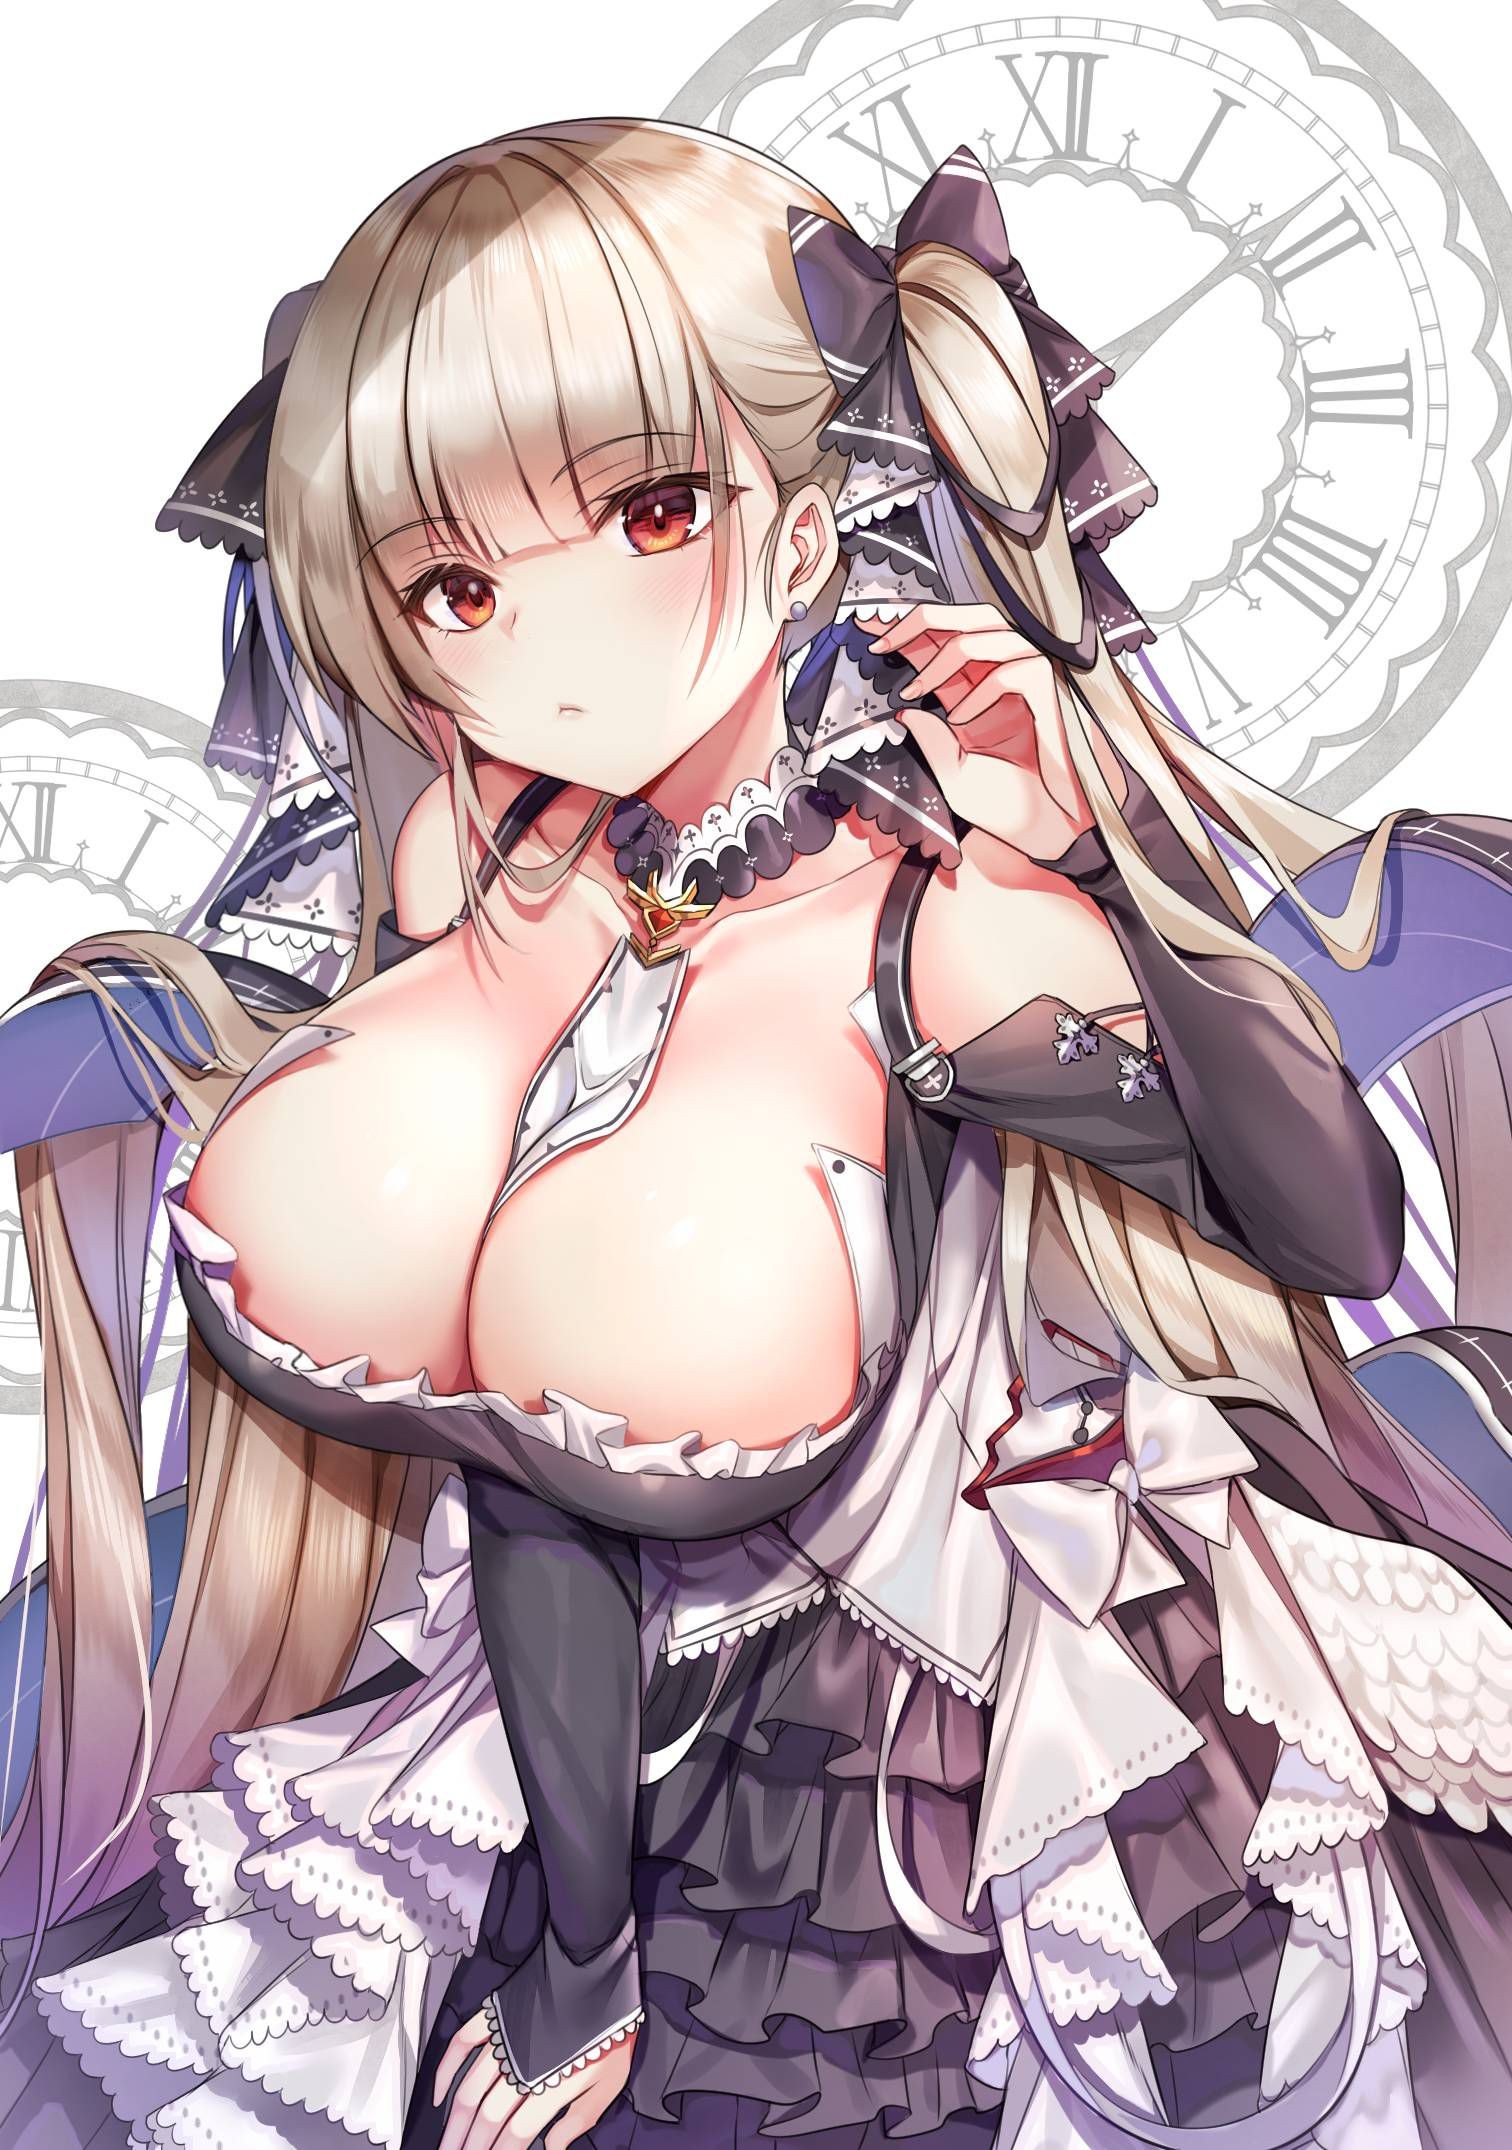 Full Movie [Secondary Erotic] Azur Lane, Illustrationus Class Aircraft Carrier Third Ship Faumi Double's Tight Image Summary! No.04 [20 Sheets] Pussy